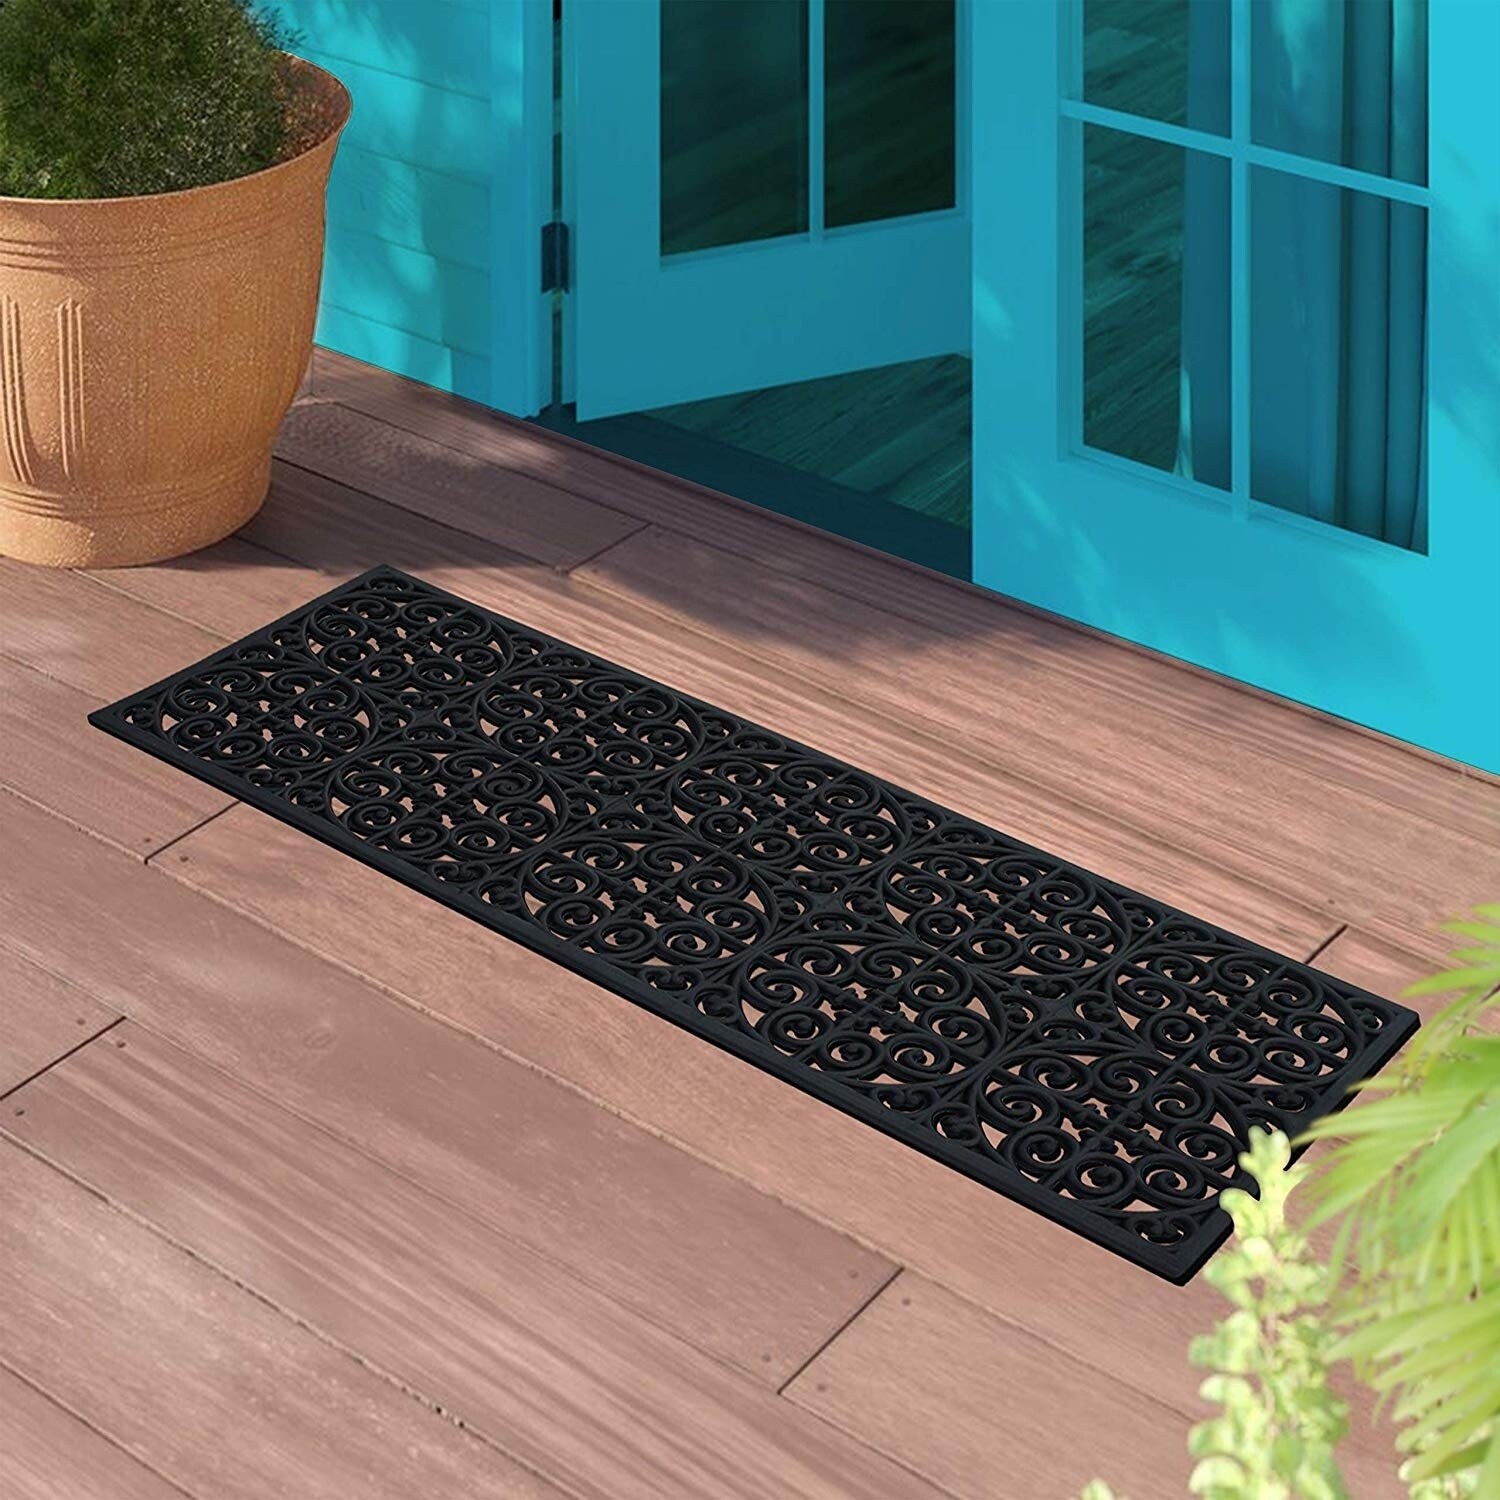 https://ak1.ostkcdn.com/images/products/30428190/Grill-Indoor-Outdoor-18-X48-Easy-Clean-Rubber-Doormat-All-Weather-Exterior-Doors-Large-Size-for-Double-Doors-971e6b03-78a5-4eec-8ce1-ef6a314a0cec.jpg